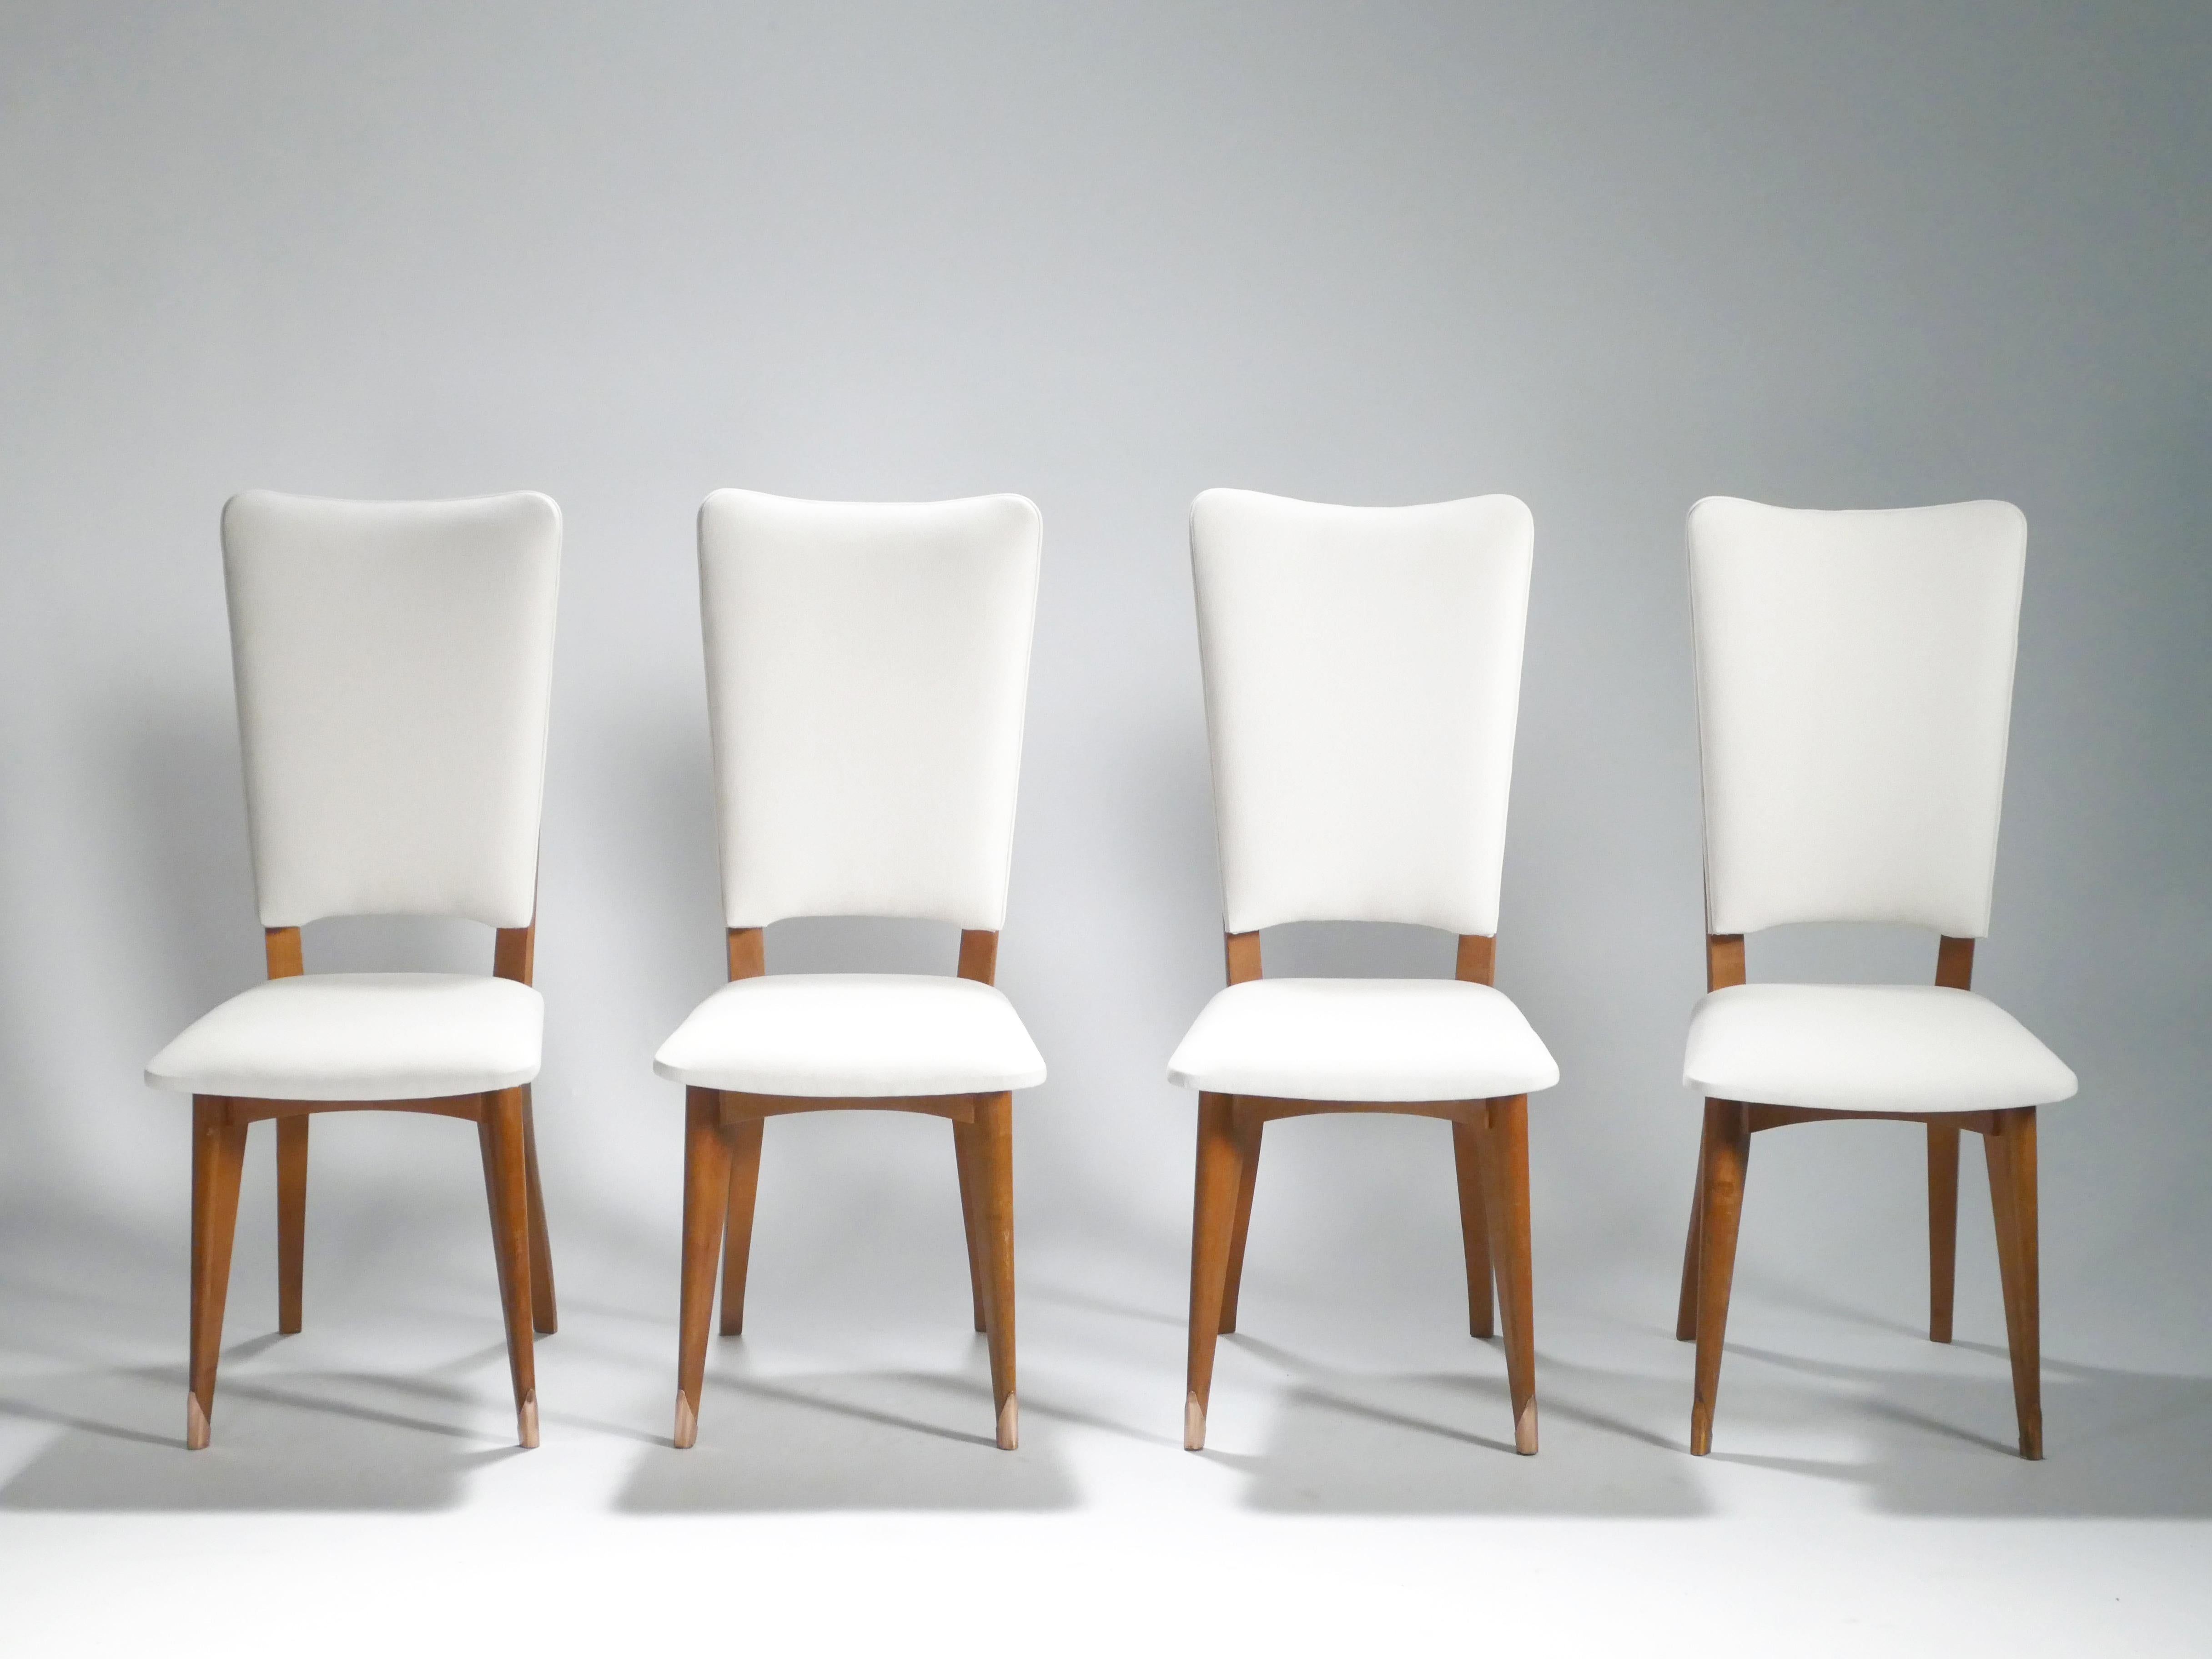 These 1960s chairs are examples of the widely admired elegant and chic Danish furniture design. With base and feet made from durable teak and new upholstery in superior, cool white Casamance fabric, these chairs’ simple, contrasting color scheme